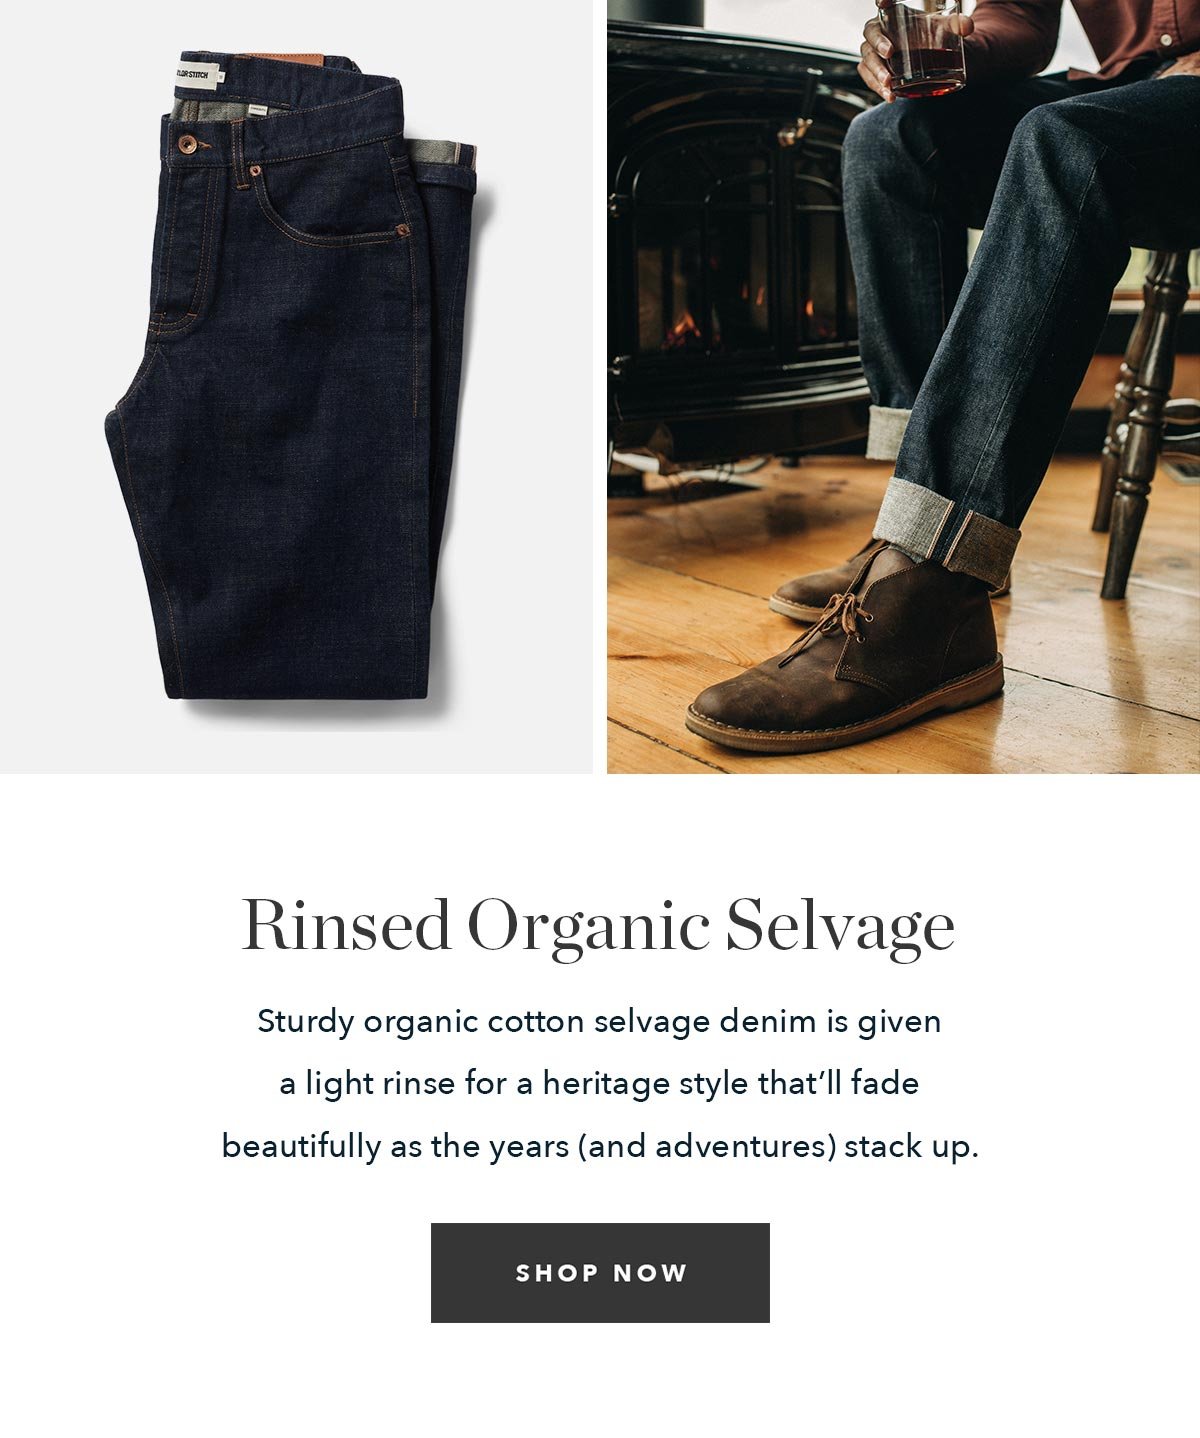 Rinsed Organic Selvage: Sturdy organic cotton selvage denim is given a light rinse for a heritage style that’ll fade beautifully as the years (and adventures) stack up. 